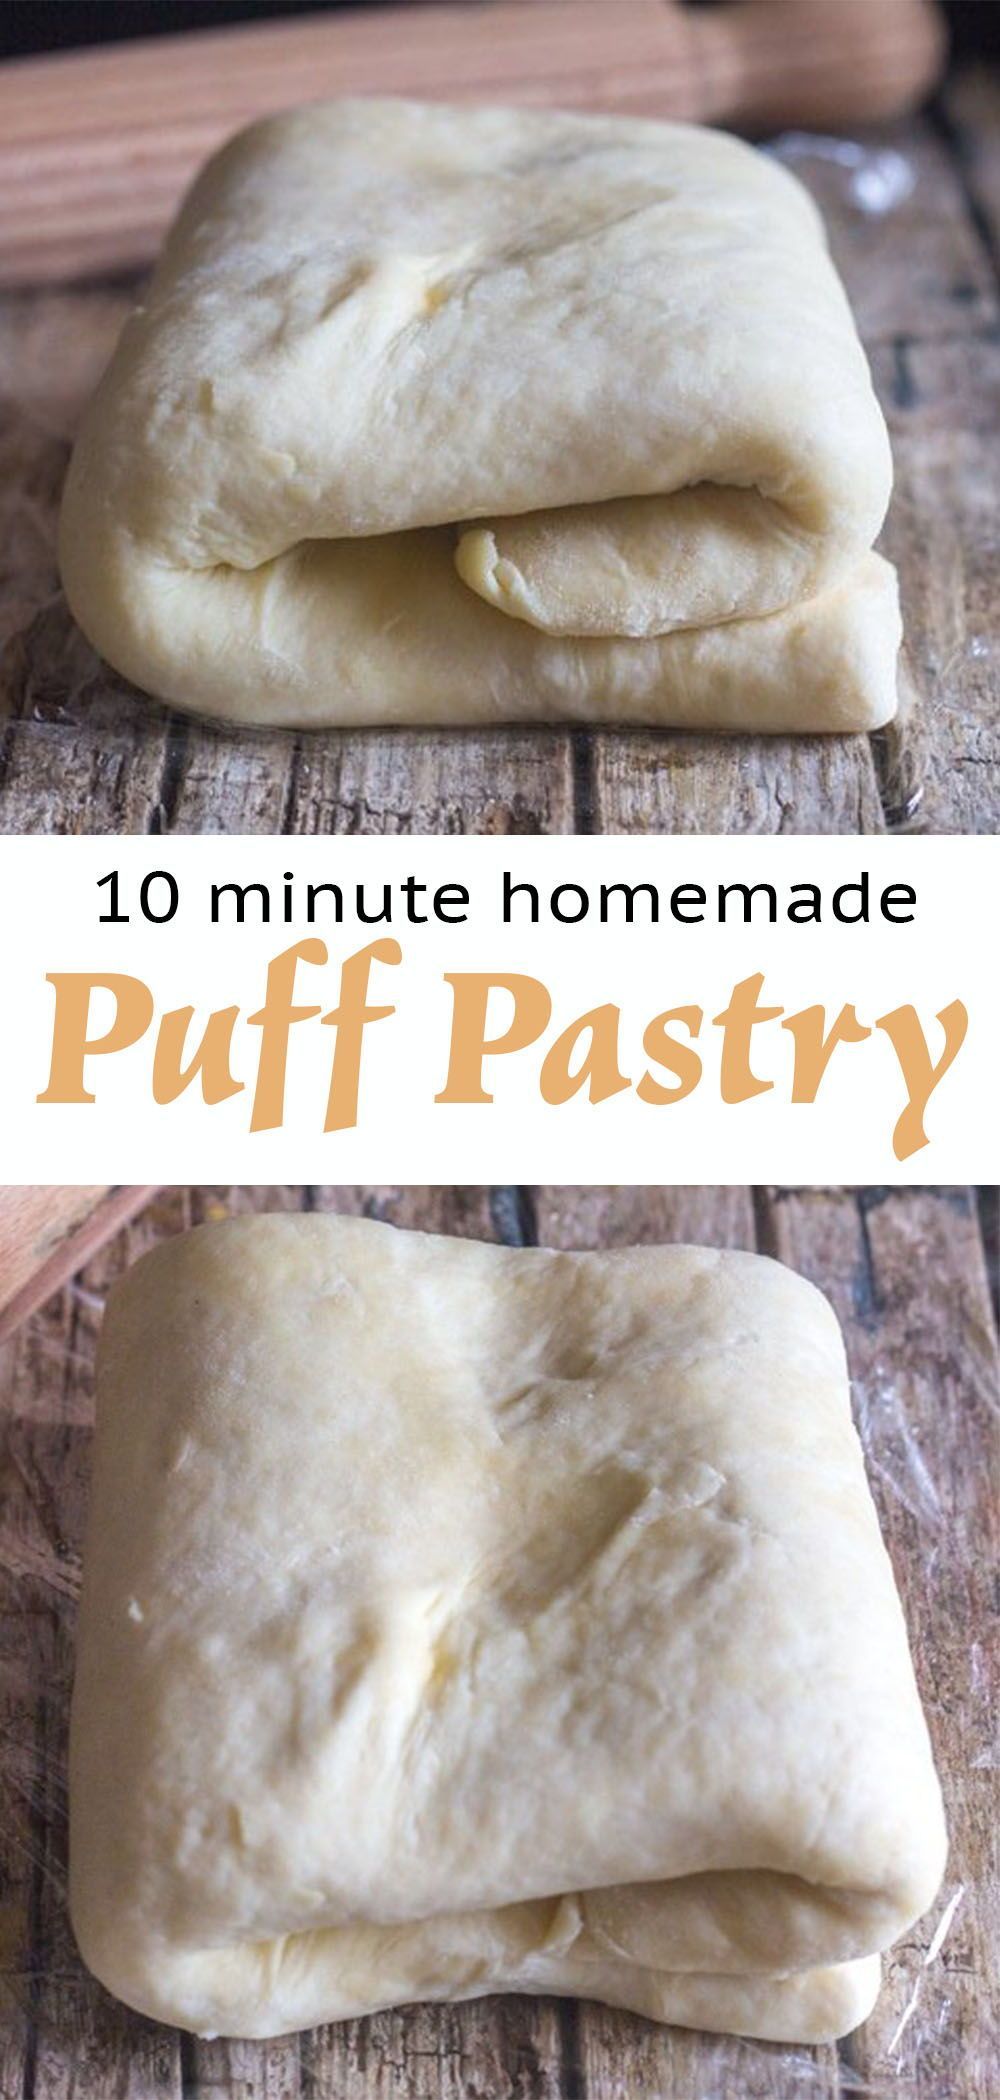 10 Minute Homemade Puff Pastry -   20 desserts Fun puff pastries ideas